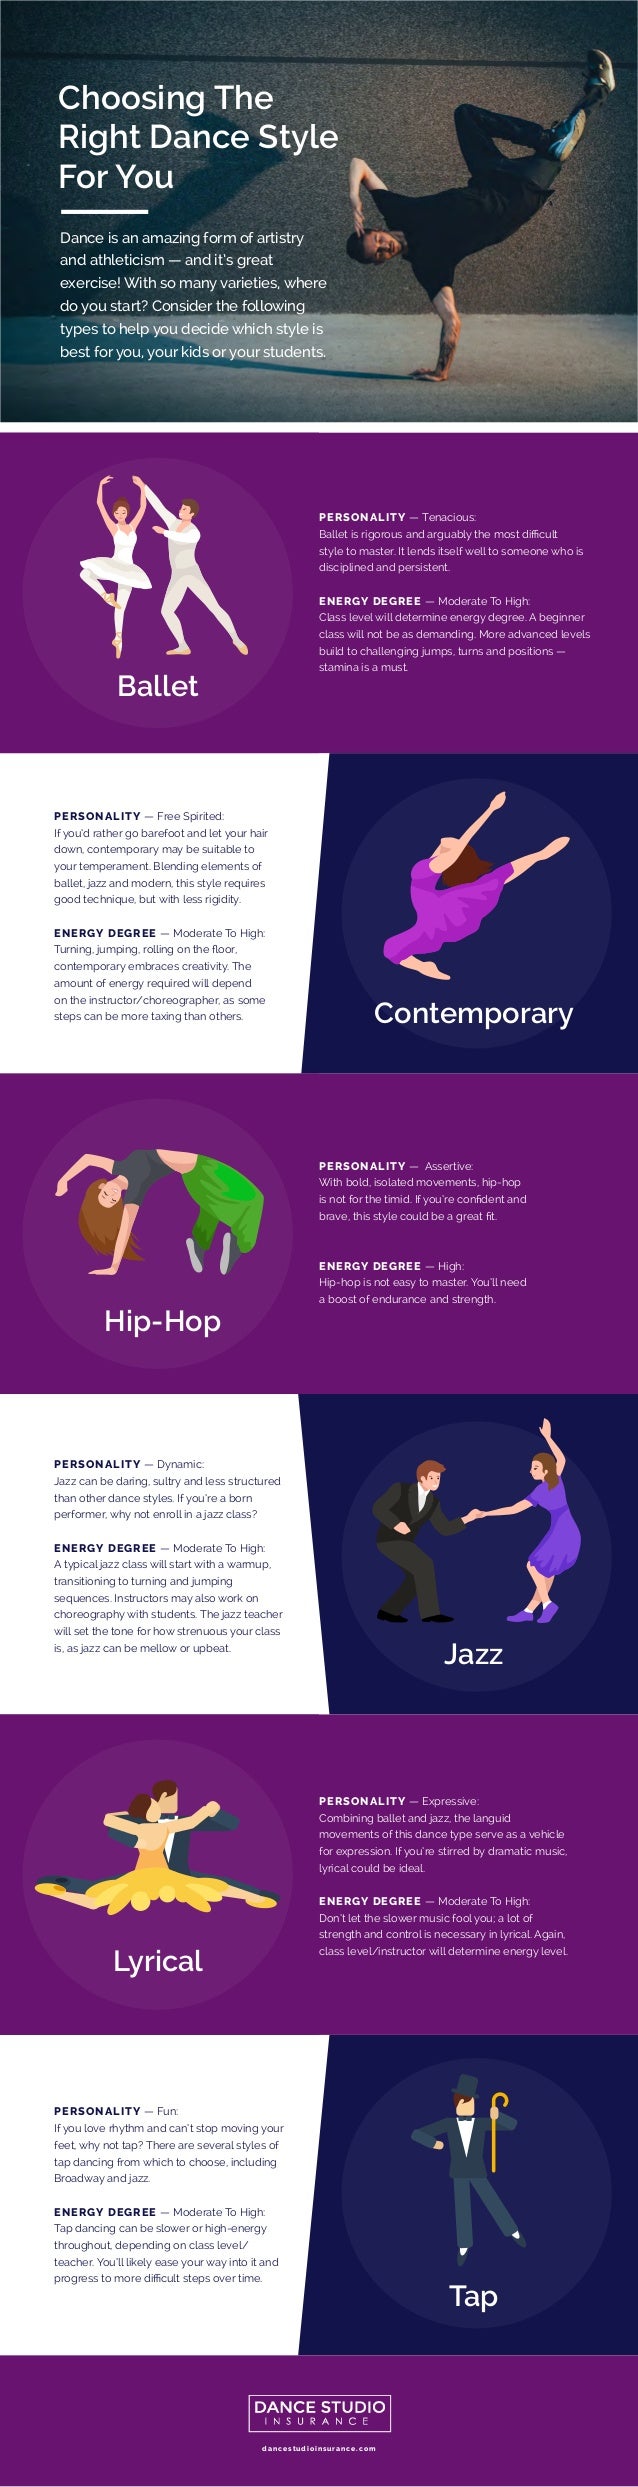 Choosing The Right Dance Style For You